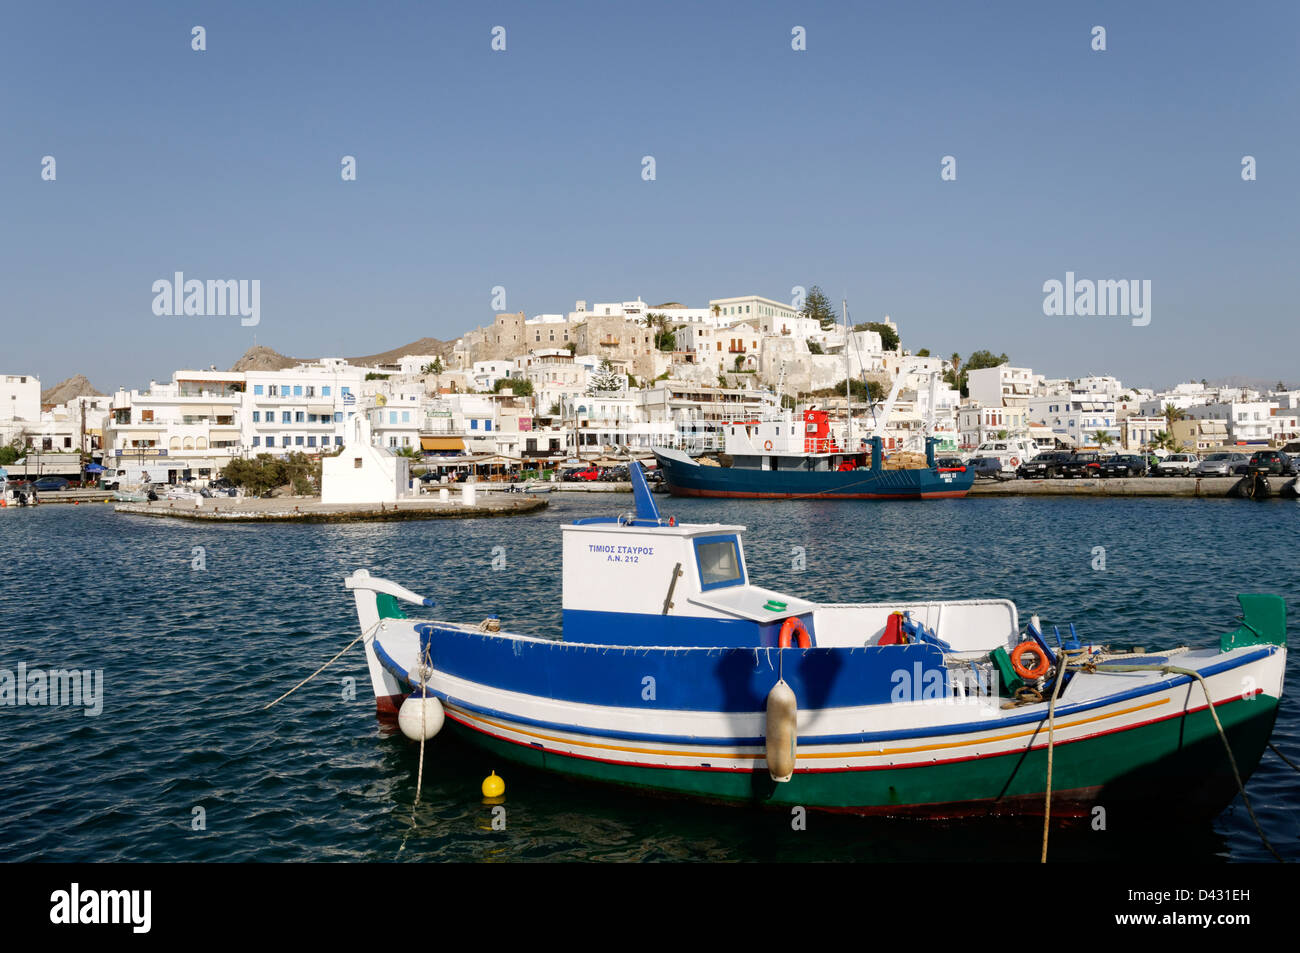 Naxos. Cyclades. Greece. A small docked fishing boat in the harbour of Chora (Naxos town) which rises in the background. Stock Photo